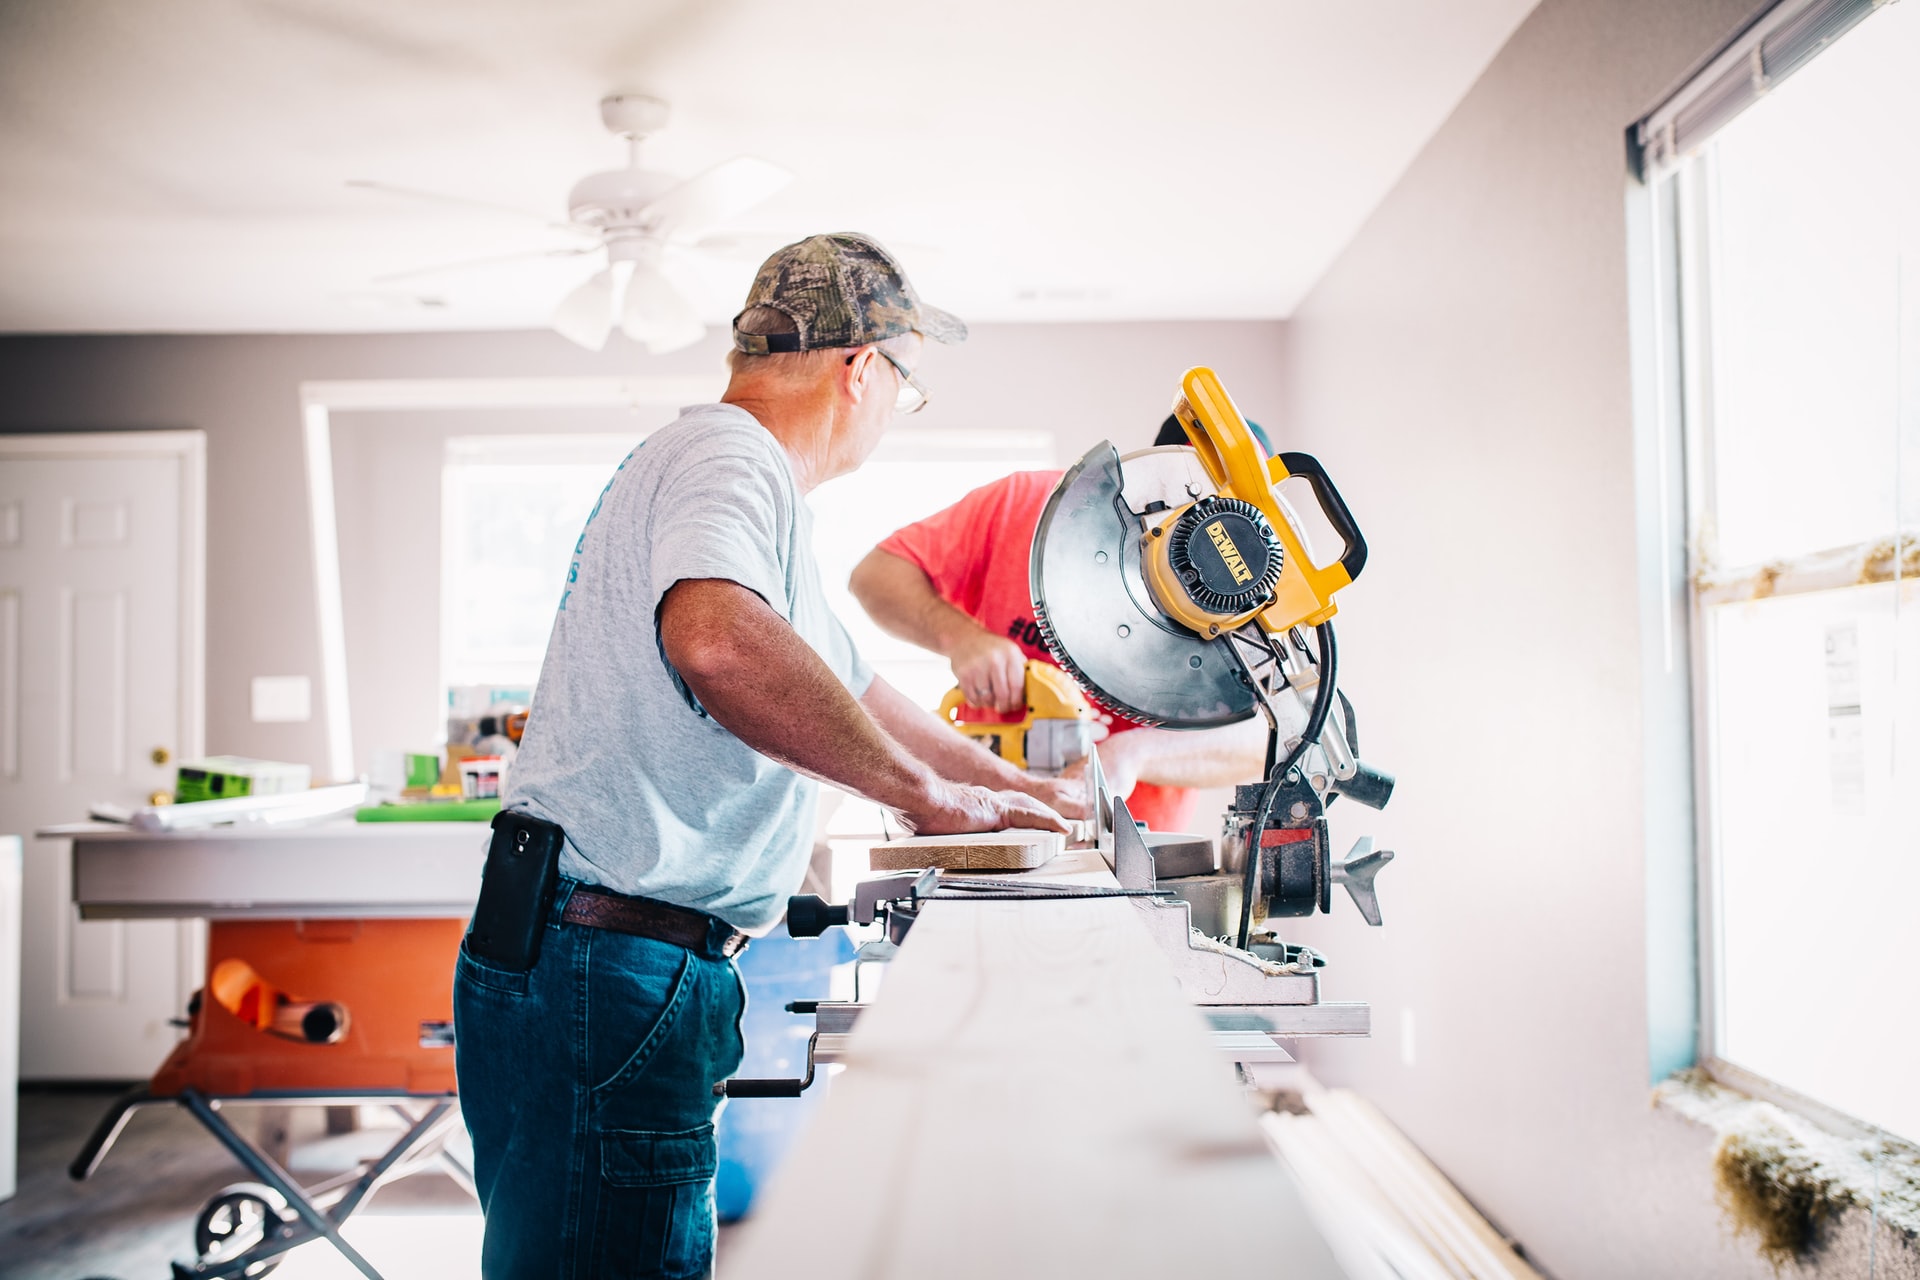 When remodeling, how to know when you should demo and start fresh